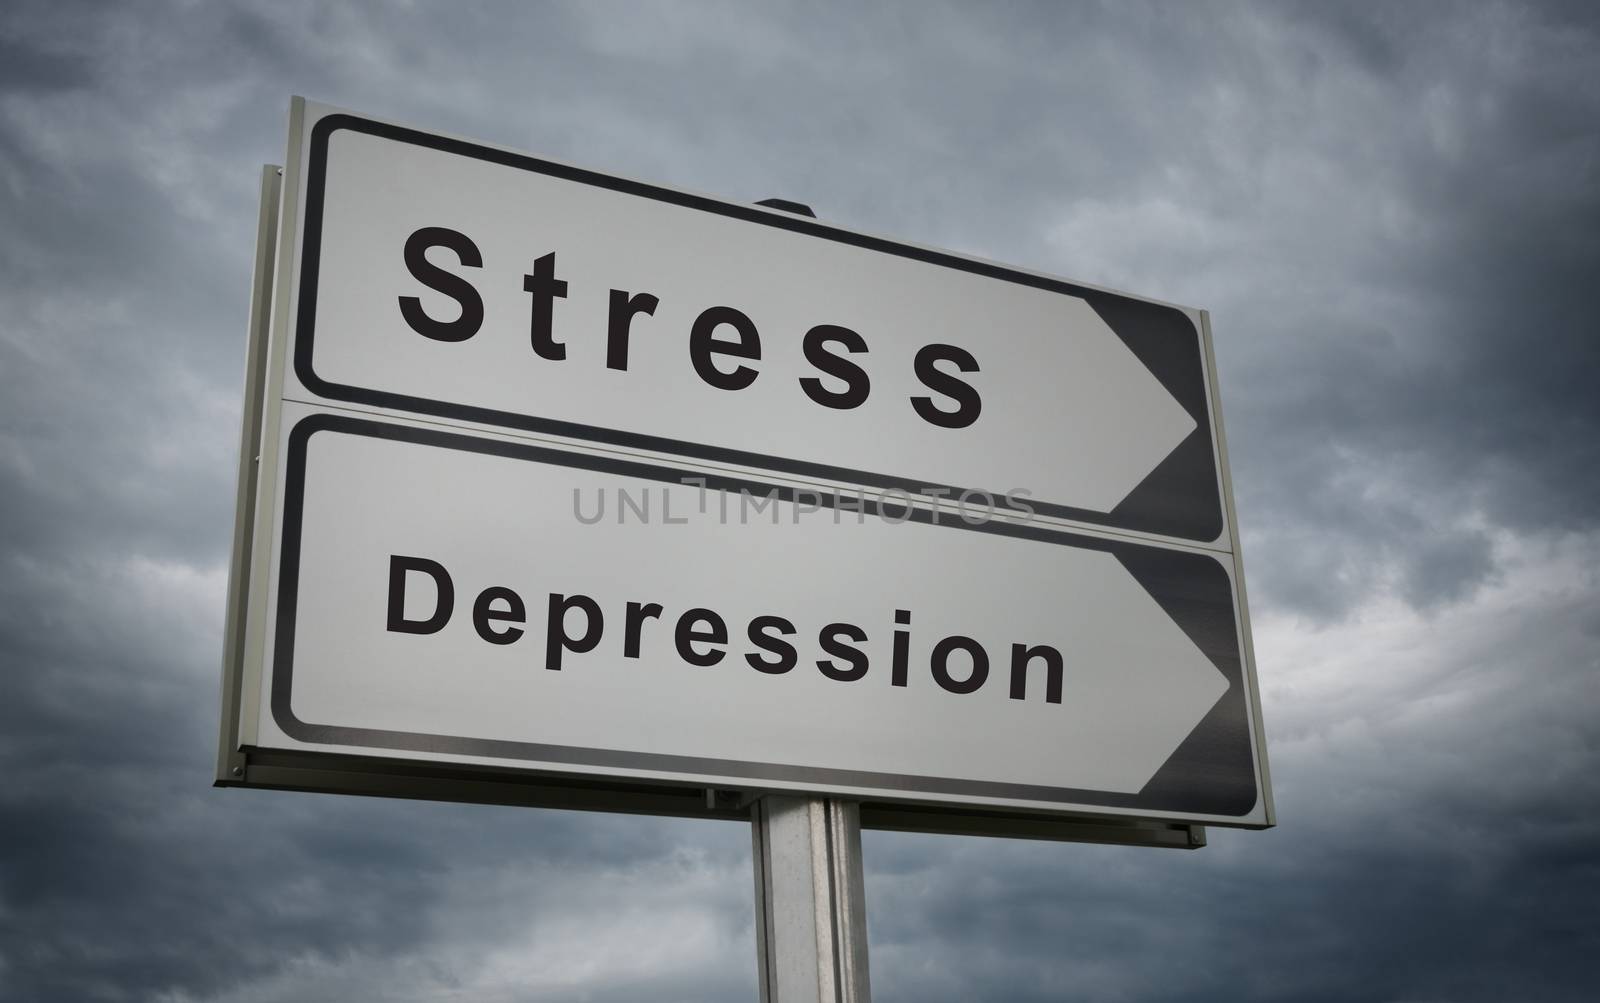 Stress Depression road sign on background of dark clouds. by BPhoto